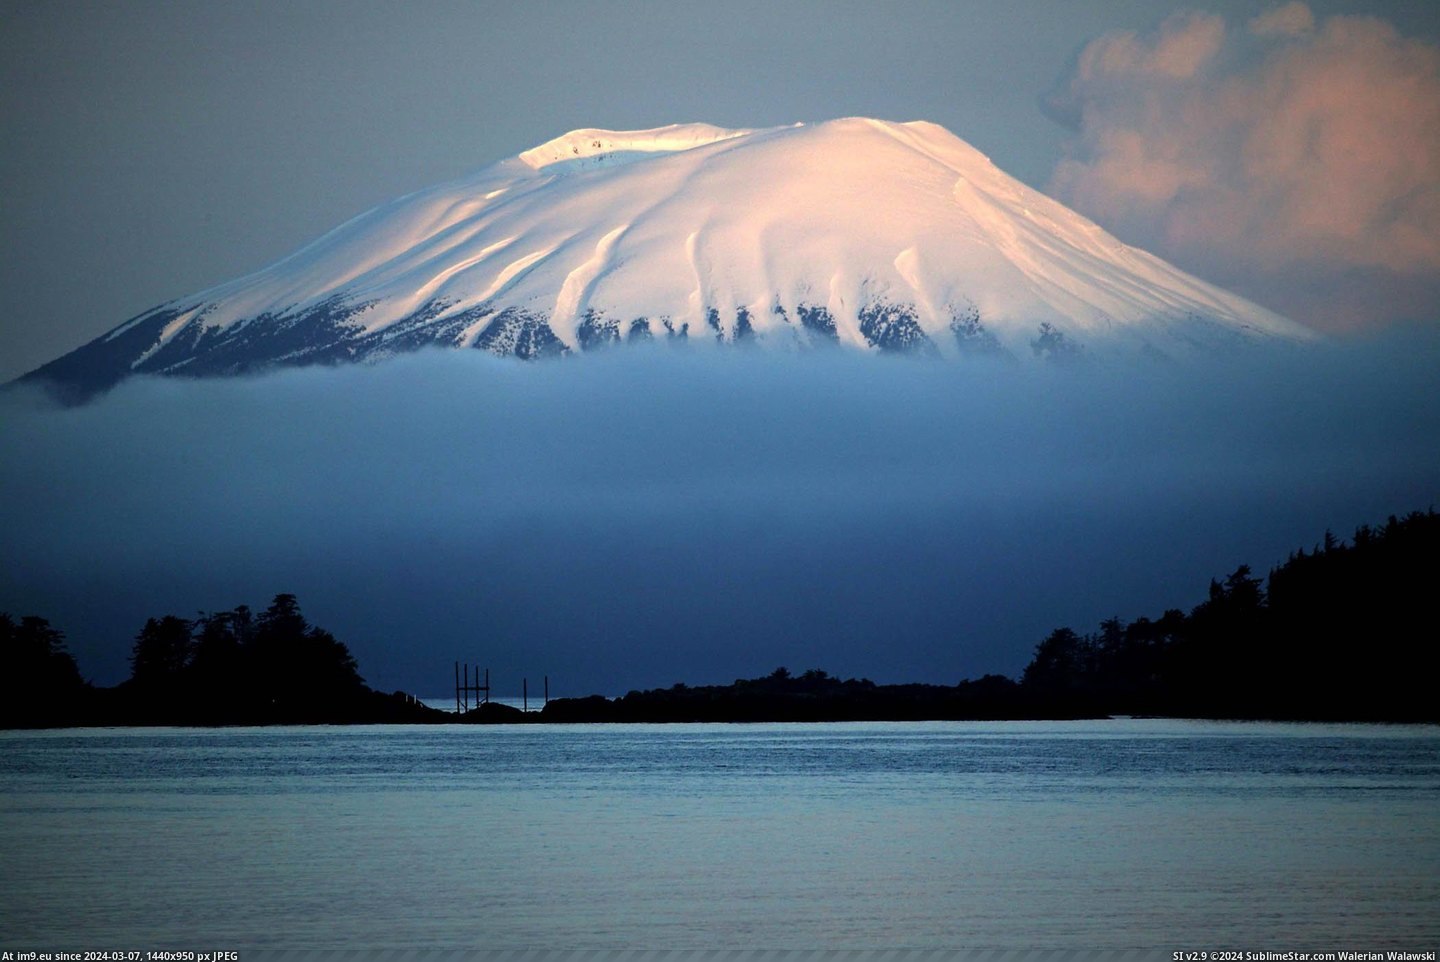 #Out #Mount #Sitka #Edgecumbe #Fog #Rising [Earthporn] Mount Edgecumbe rising out of the fog (Sitka, AK) [2100x1397] Pic. (Изображение из альбом My r/EARTHPORN favs))